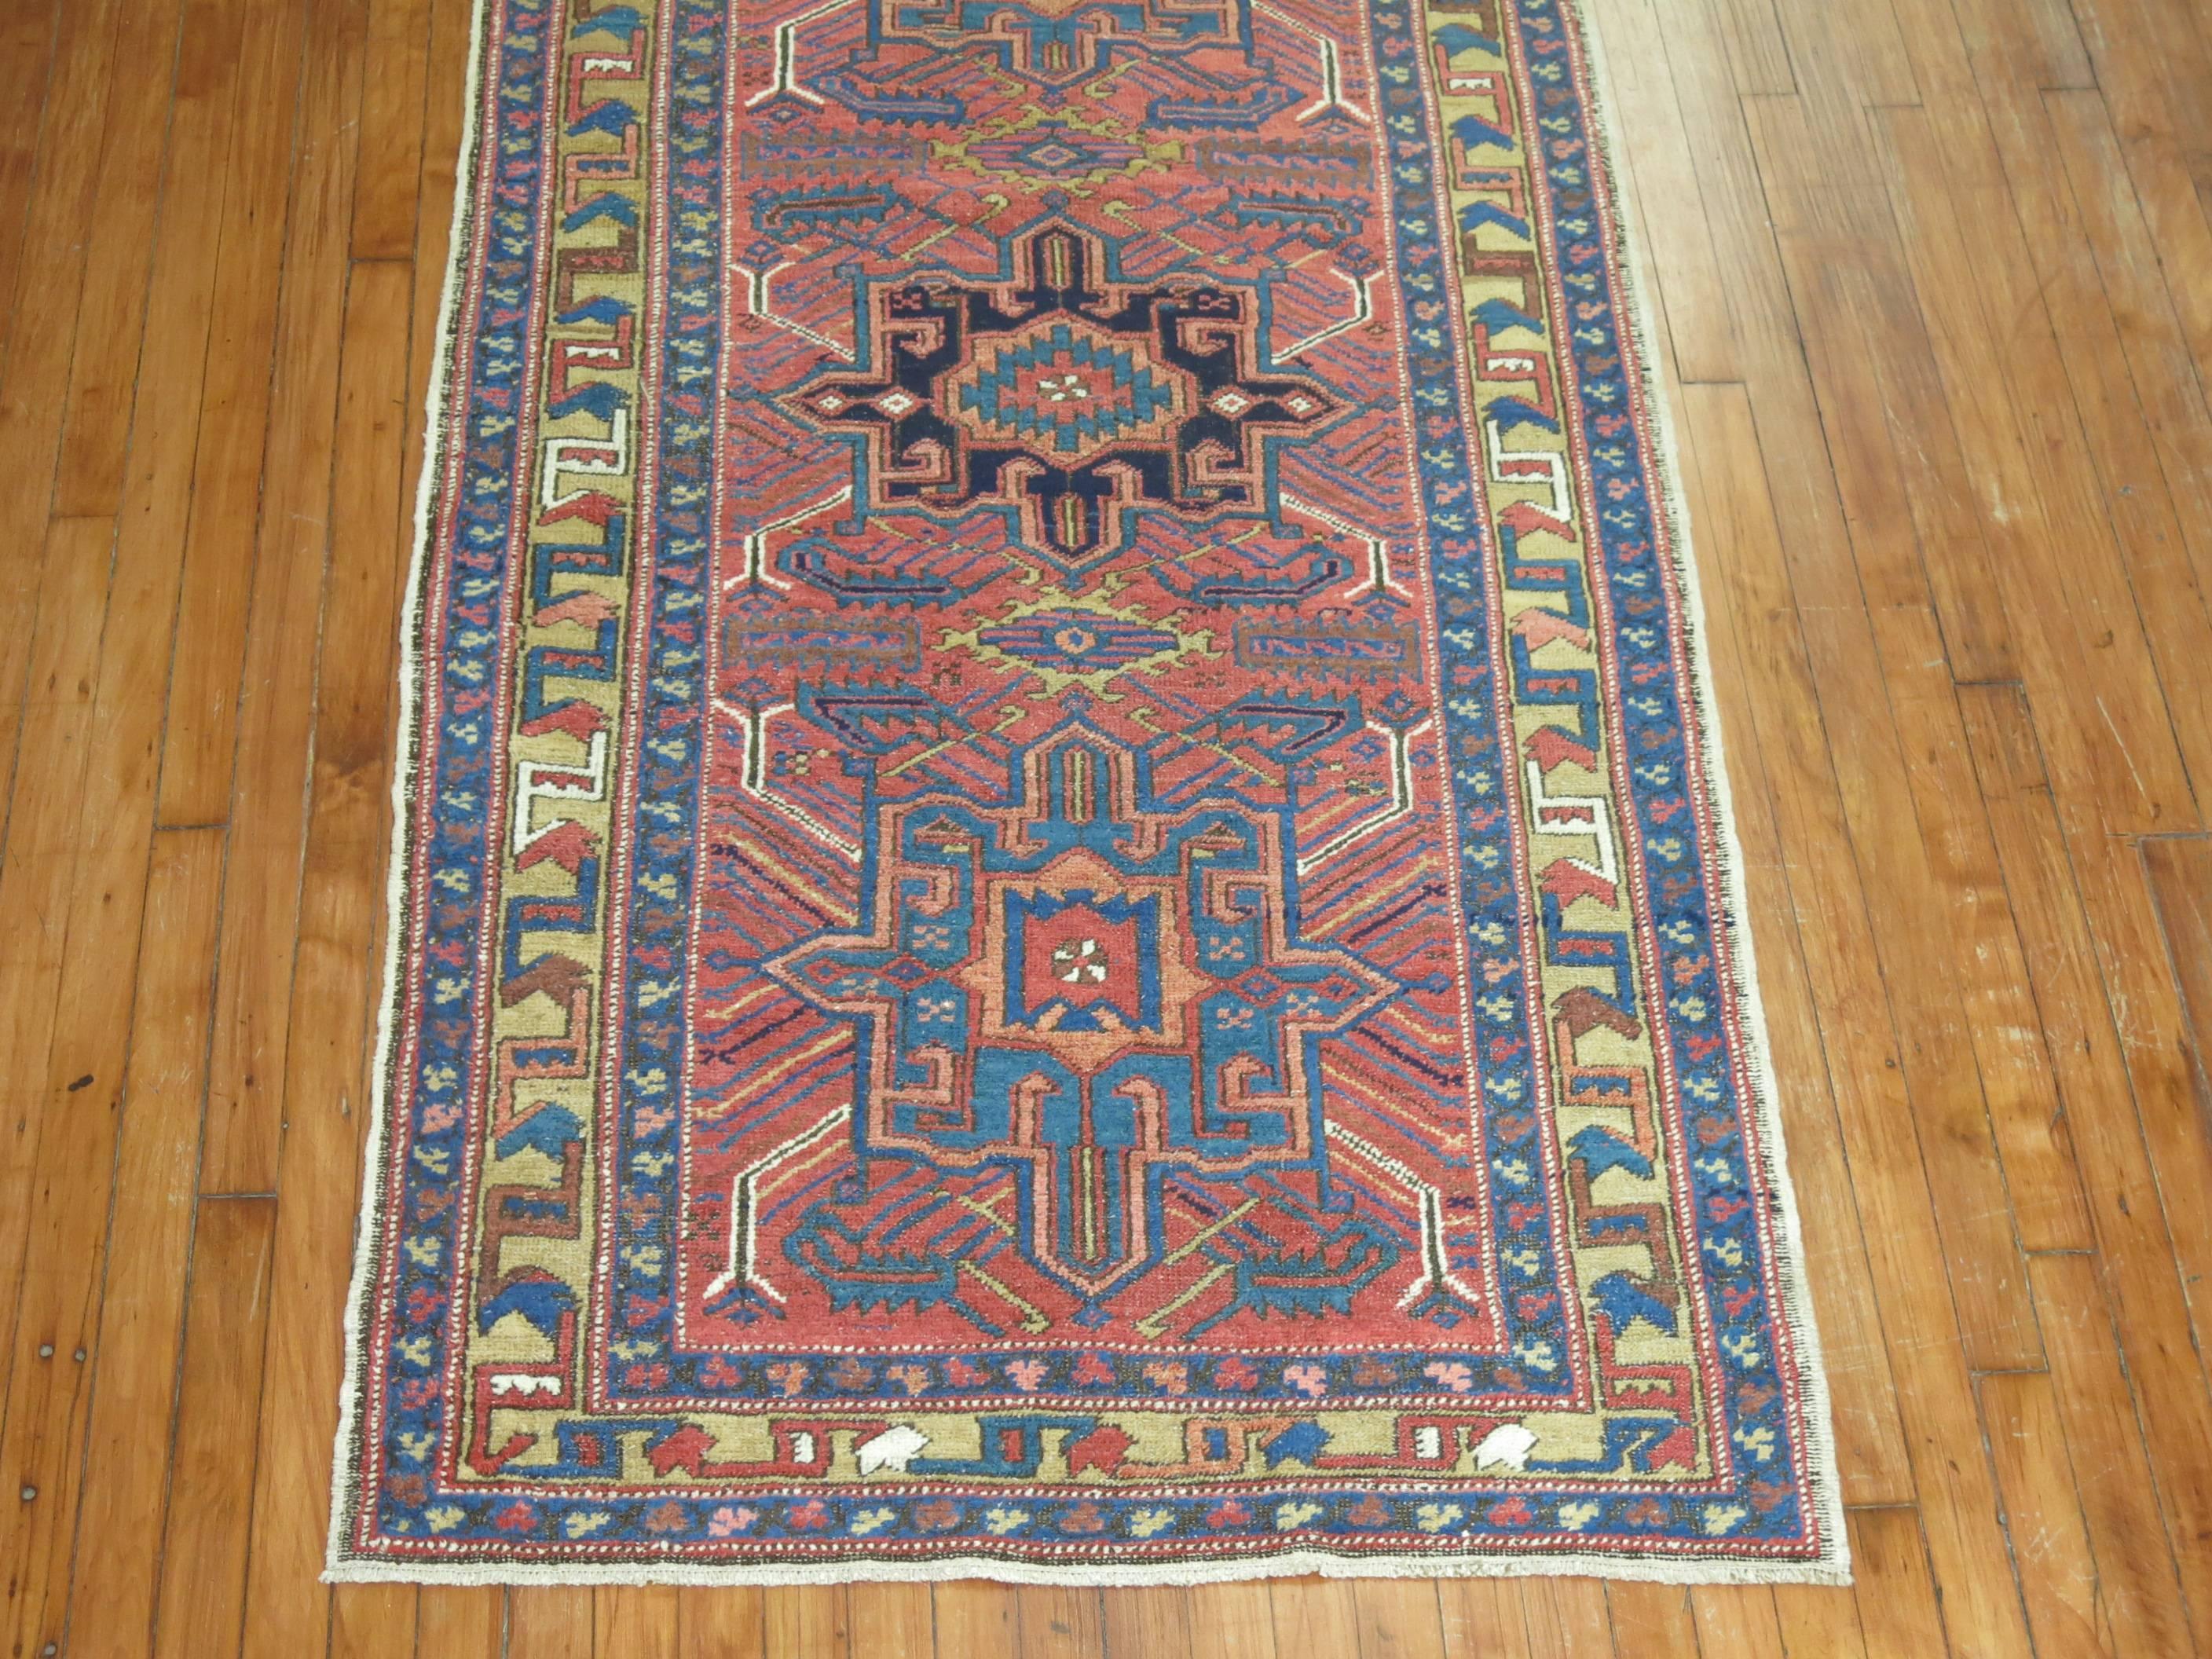 A one of a kind vintage Persian Heriz runner.

3'6